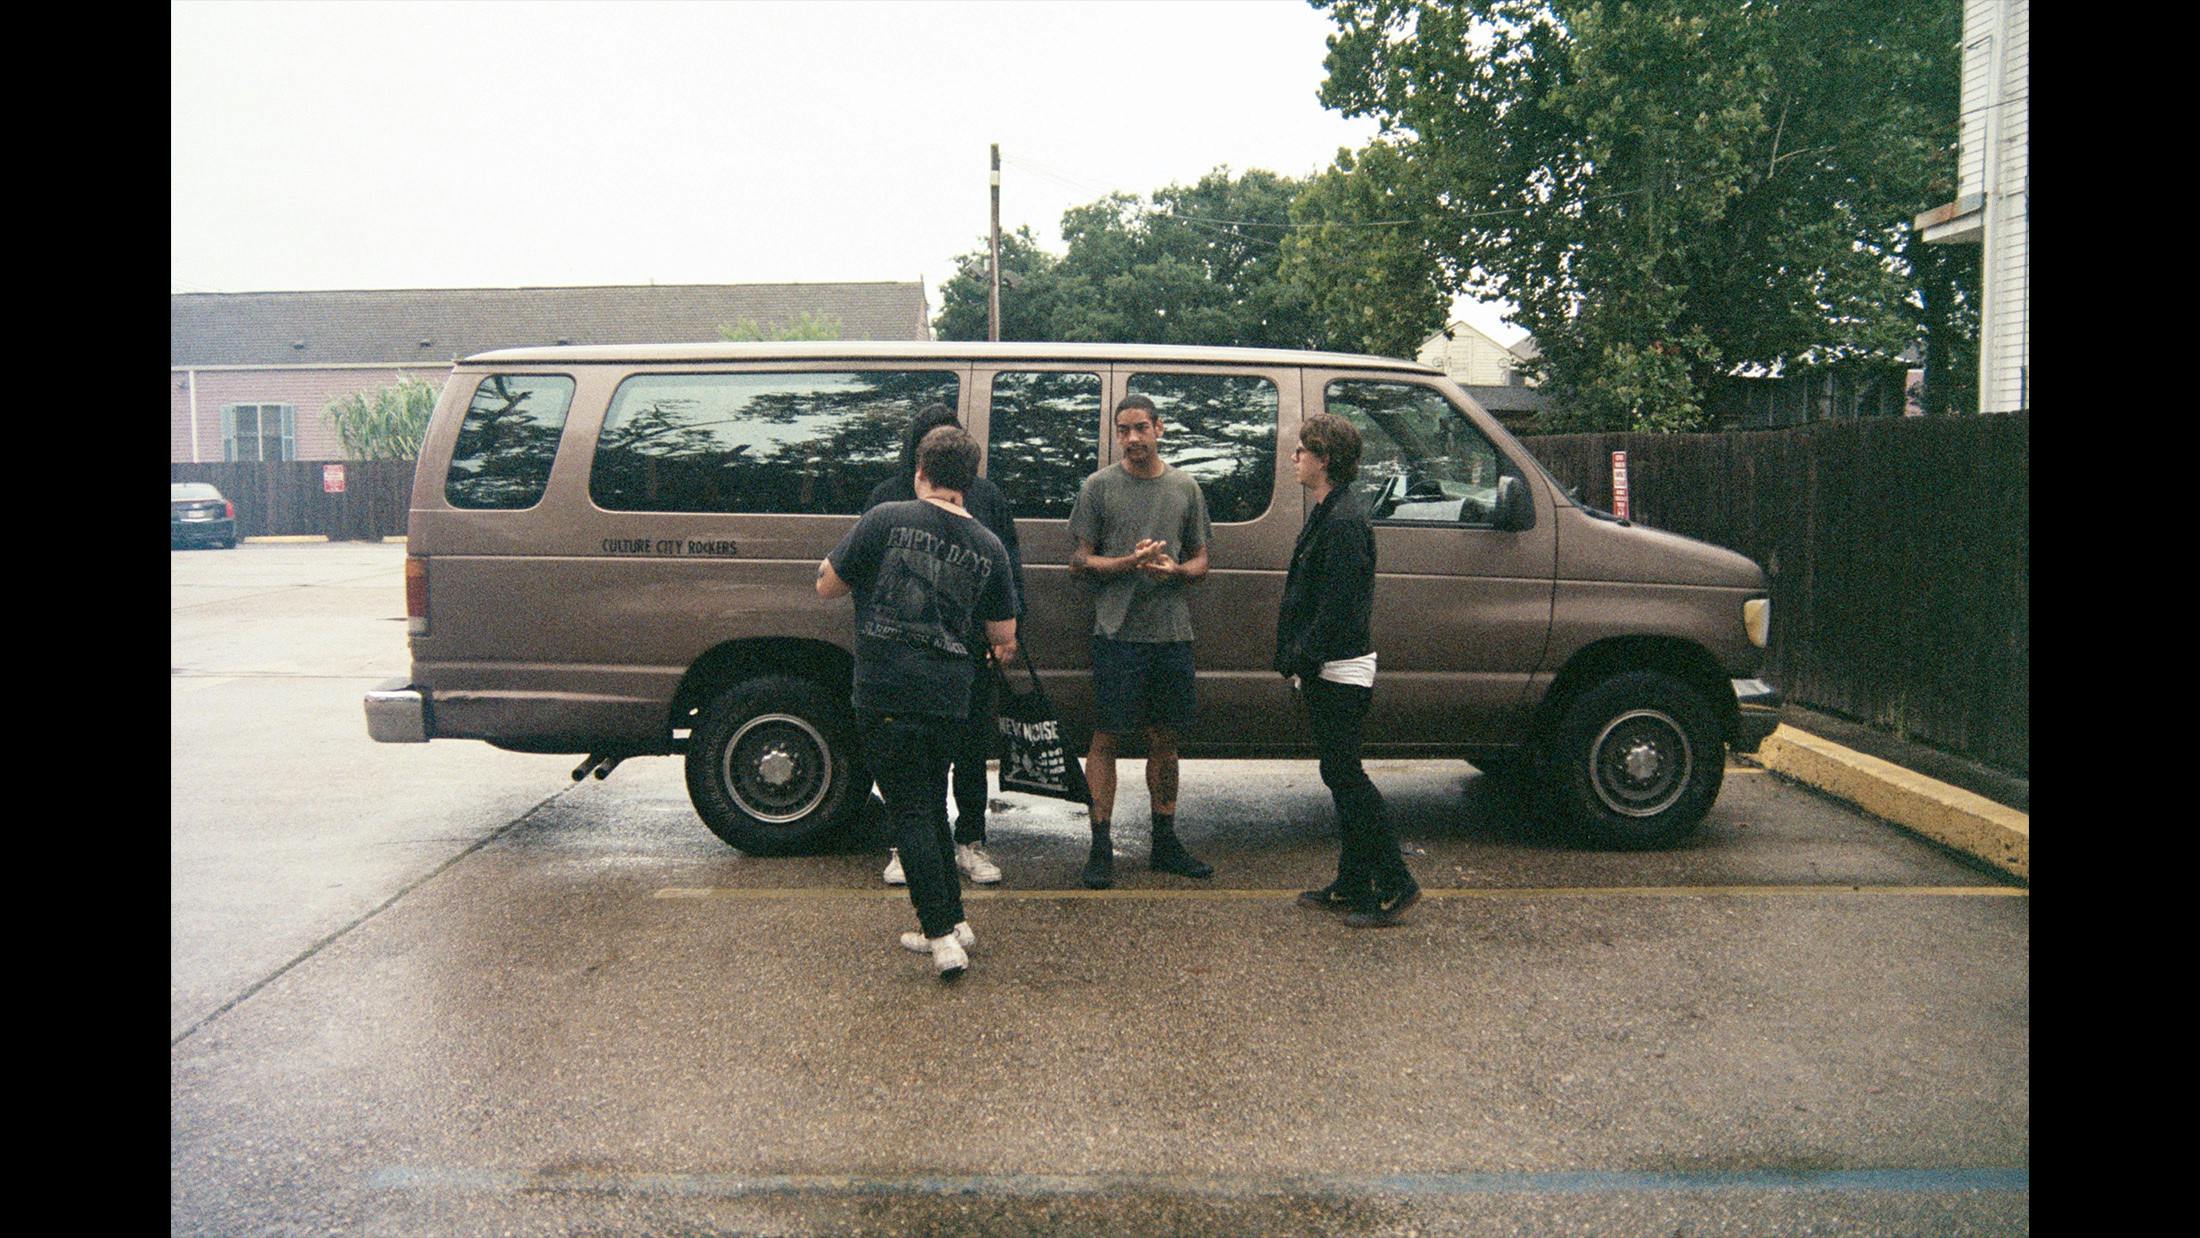 We were touring from SF to Atlanta to play Wrecking Ball Fest. It was a hell of a haul and we played a handful of shows on our way there in the most random places. We spent a couple days in New Orleans, crashing with our friend Gary from Eyehategod. Dave wanted to try turtle soup cause it's the local Nawlines cuisine. Gary told us a good spot to go, so we hung out in the parking lot for a second to smoke some weed before getting lunch. The restaurant was like a total family place and we were high as fuck trying to act normal, ordering turtle soup.